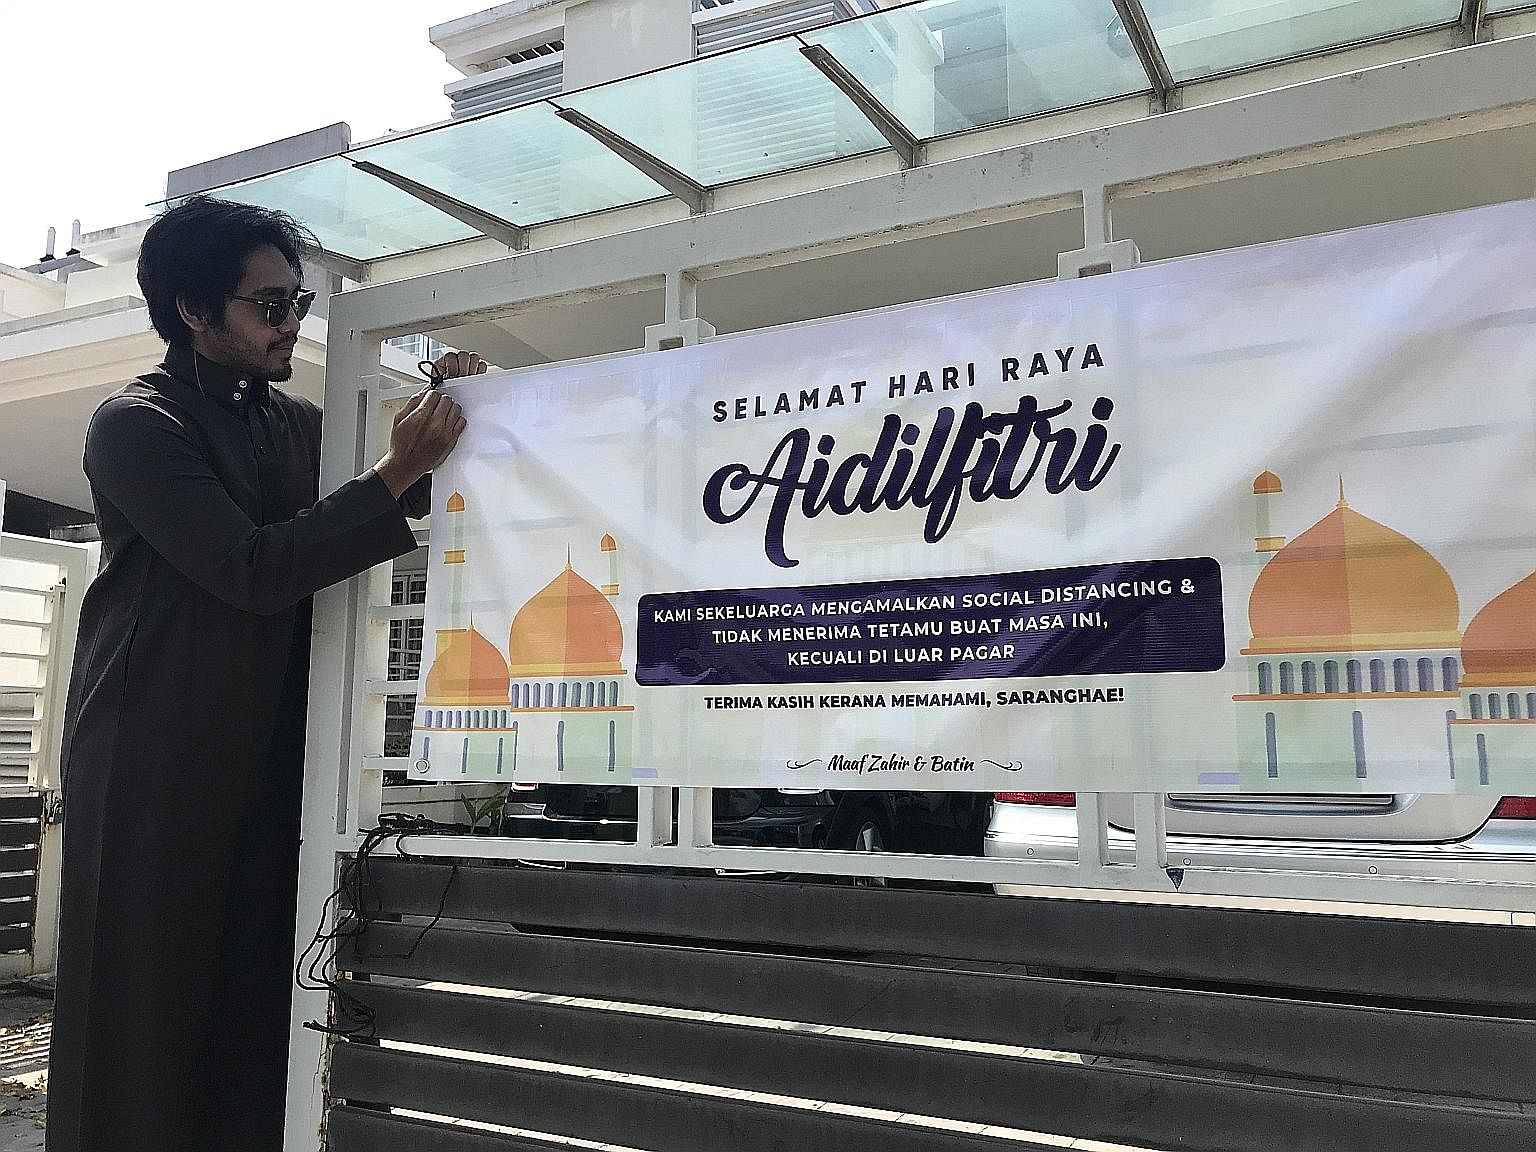 Mr Ahmad Afif Zainol putting up a Hari Raya banner outside his home in Alam Impian, Selangor. It comes with the message that the family is not accepting visitors amid the coronavirus pandemic.